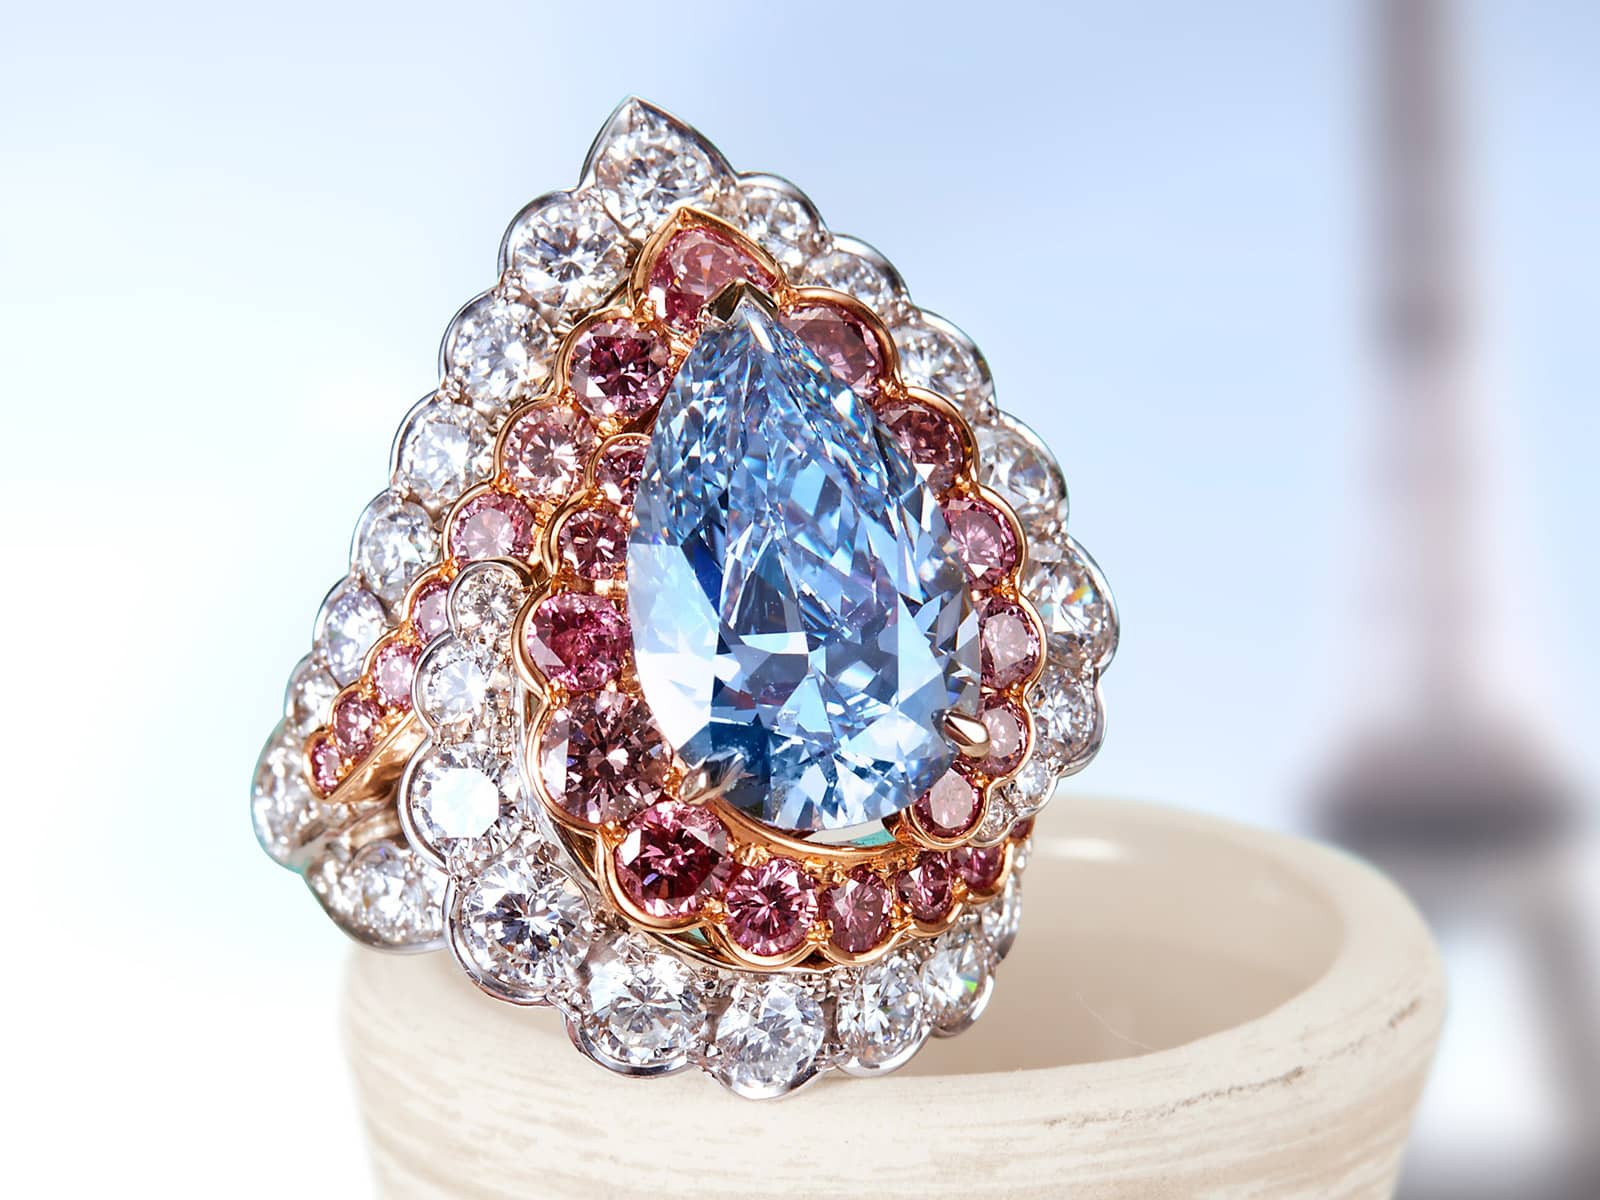 David Morris Aurora Maelstron High Jewellery ring in white gold, pink and white diamonds with a 4.28-ct blue diamond from the Skylines High Jewellery Collection 